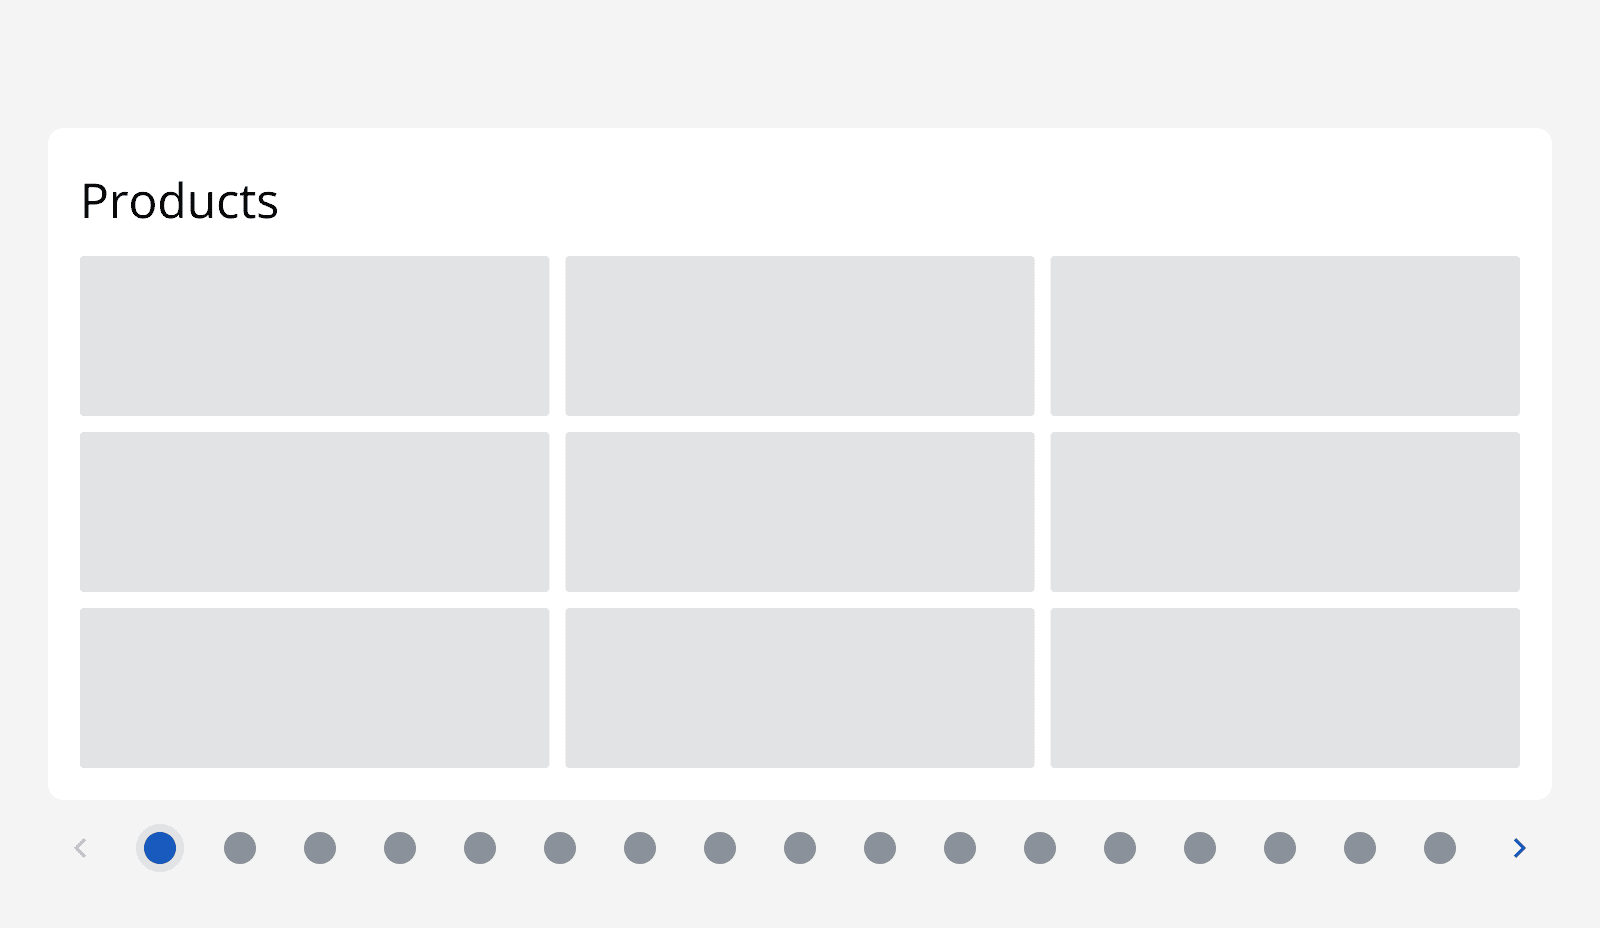 An example product grid with a carousel pagination component showing 17 page buttons.